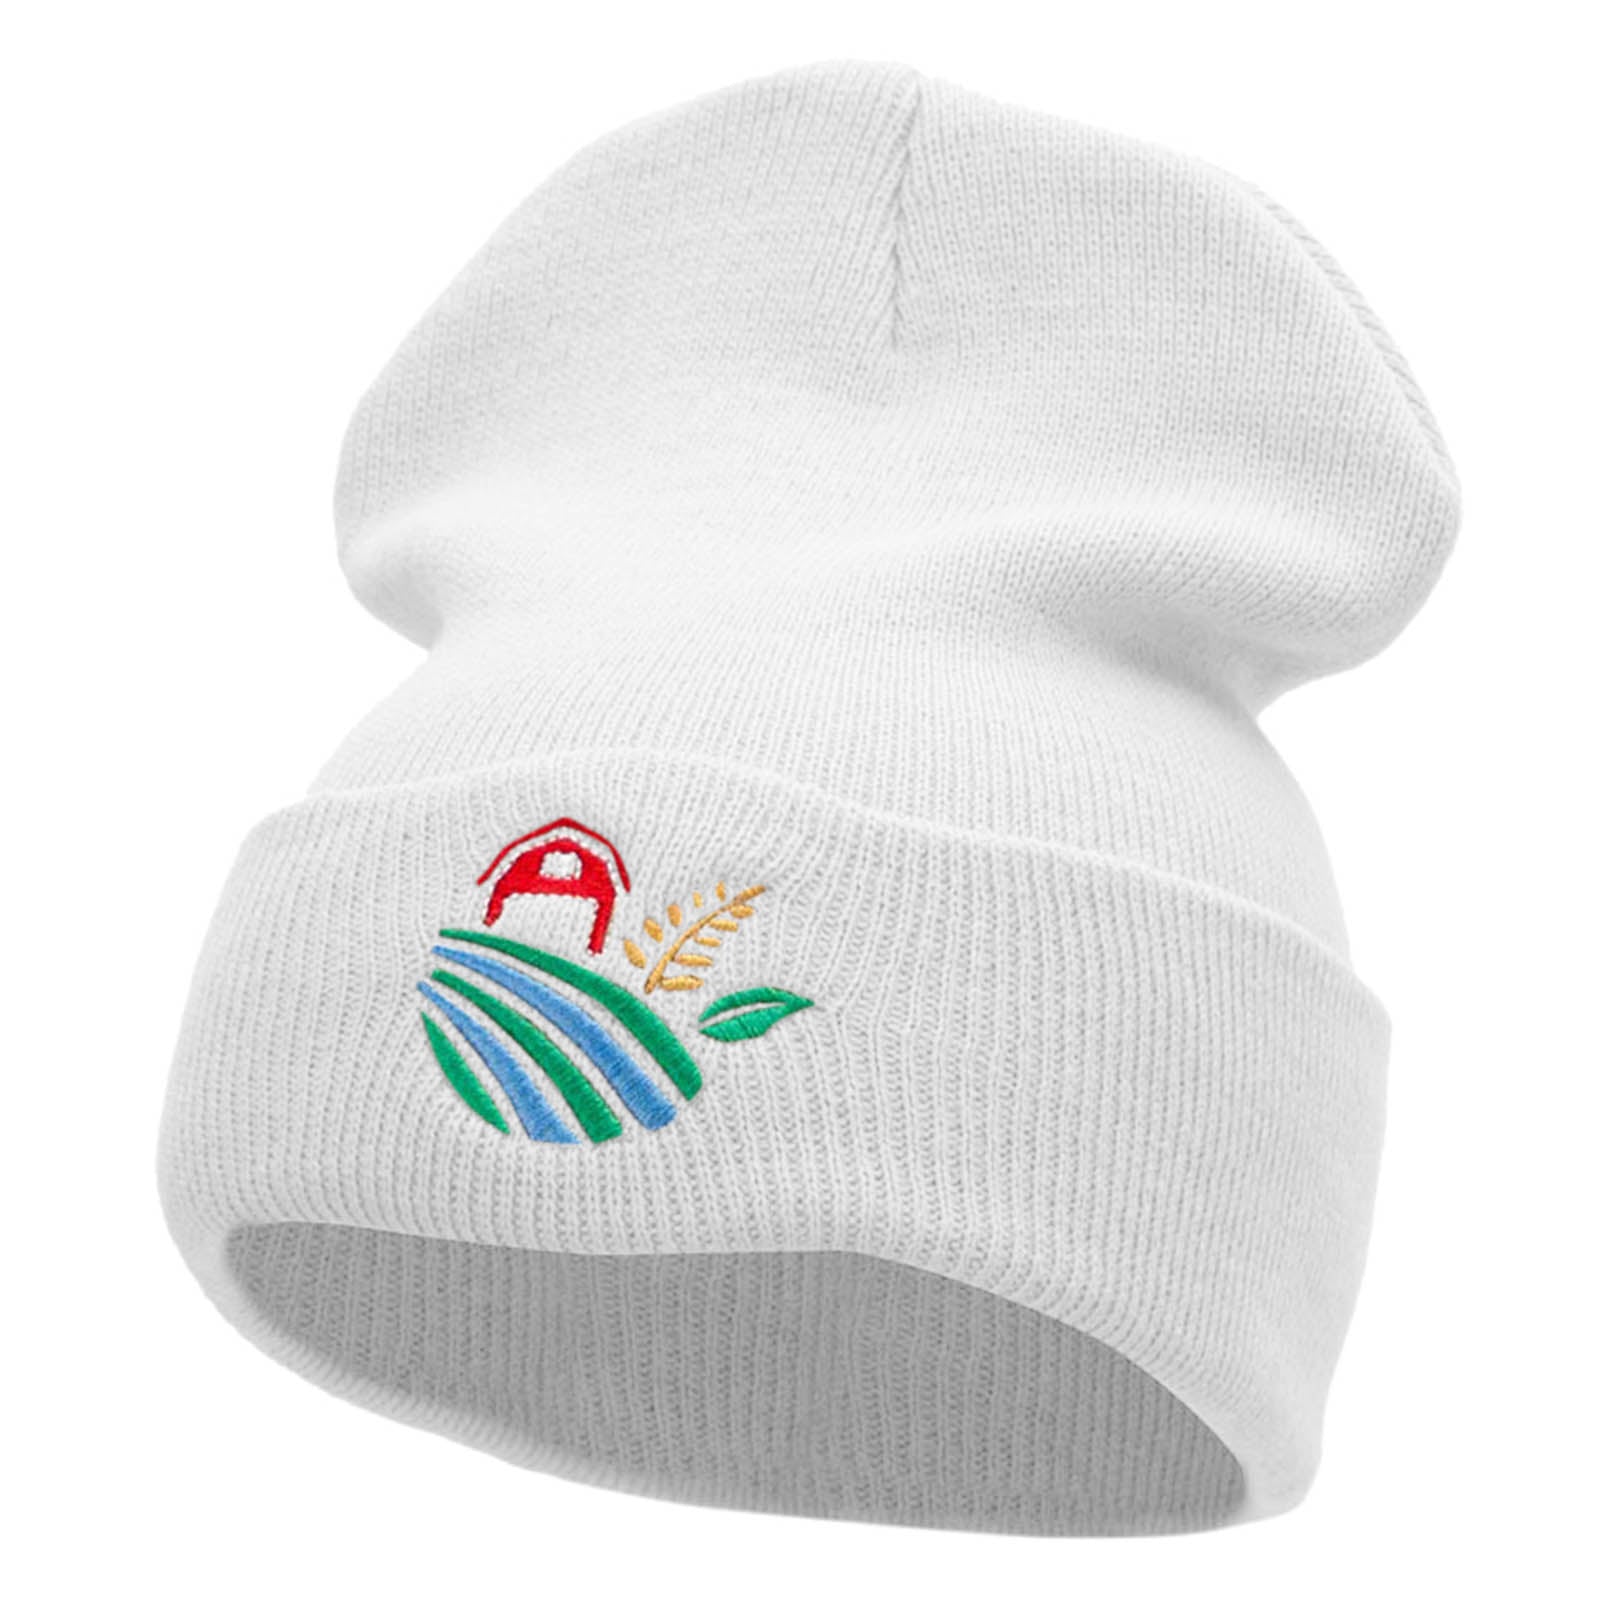 Farm Scape Embroidered 12 Inch Solid Long Beanie Made in USA - White OSFM